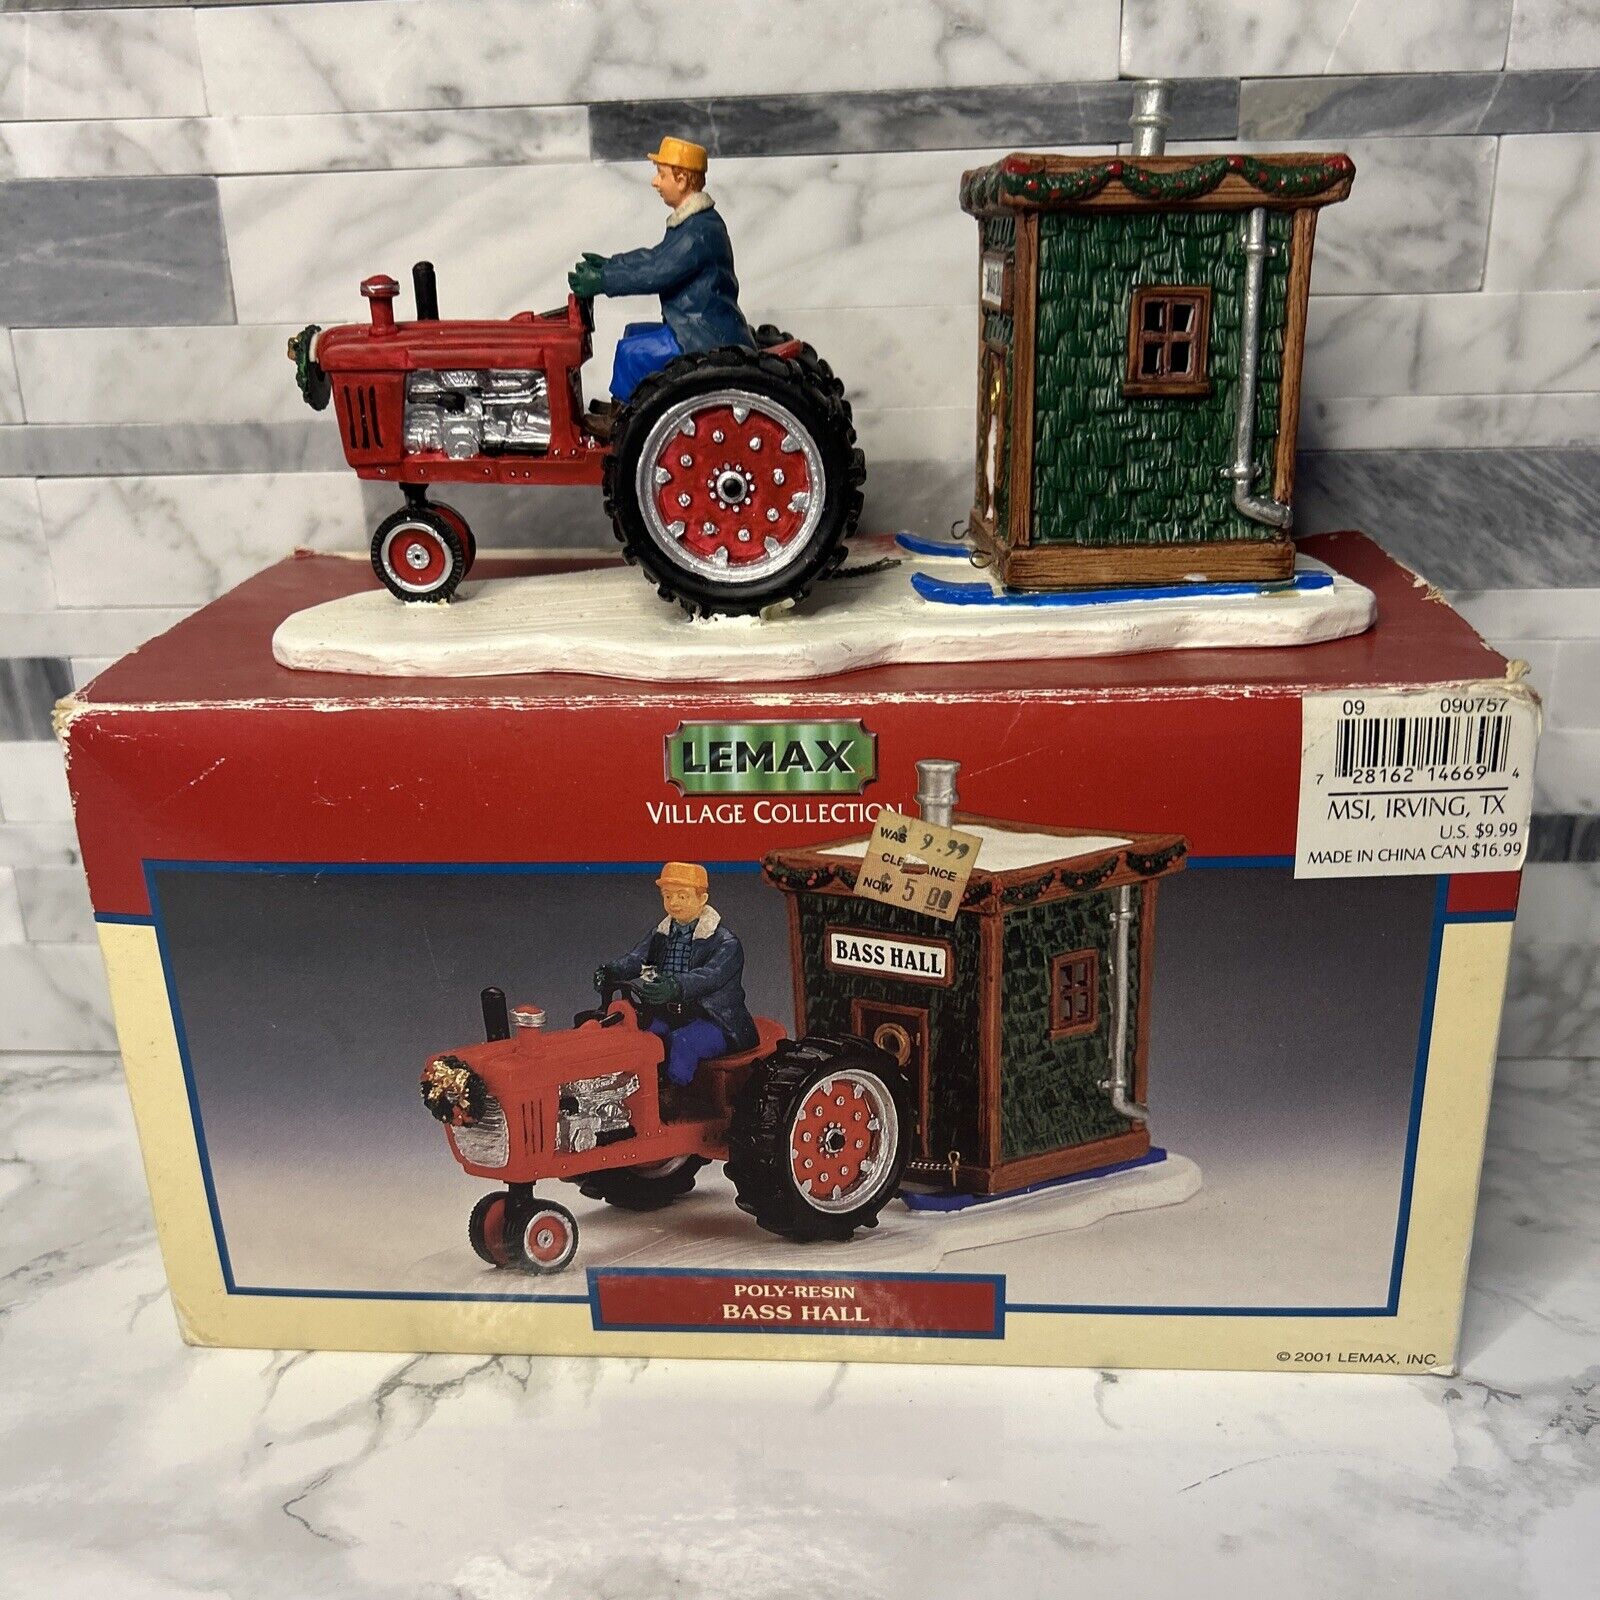 2001 Lemax Village Collection Poly-Resin Bass Hall Tractor #14669 Retired